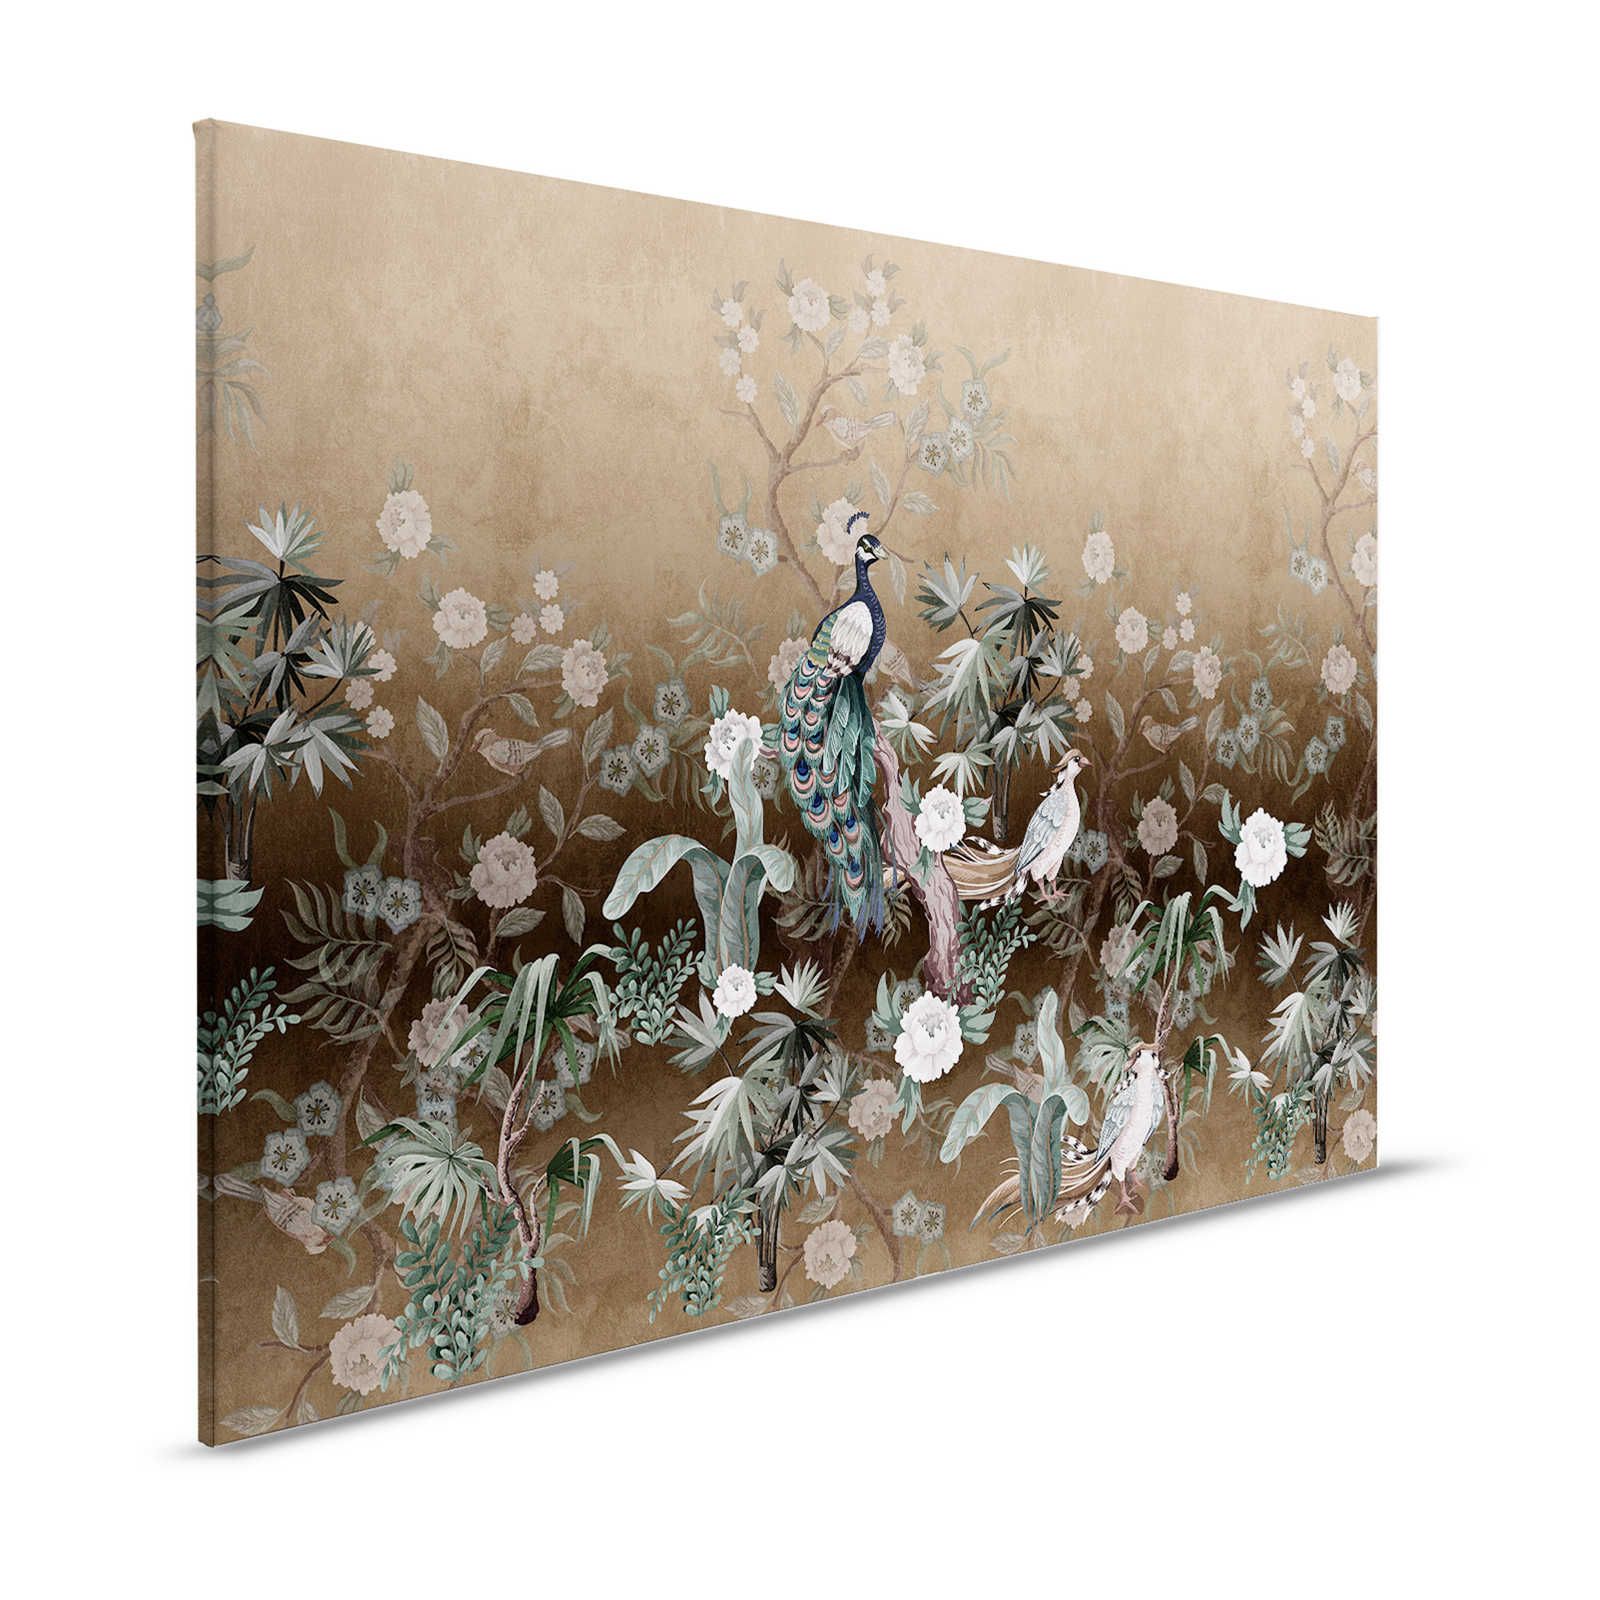 Peacock Island 2 - Canvas painting Peacock garden with flowers in beige - 1,20 m x 0,80 m
